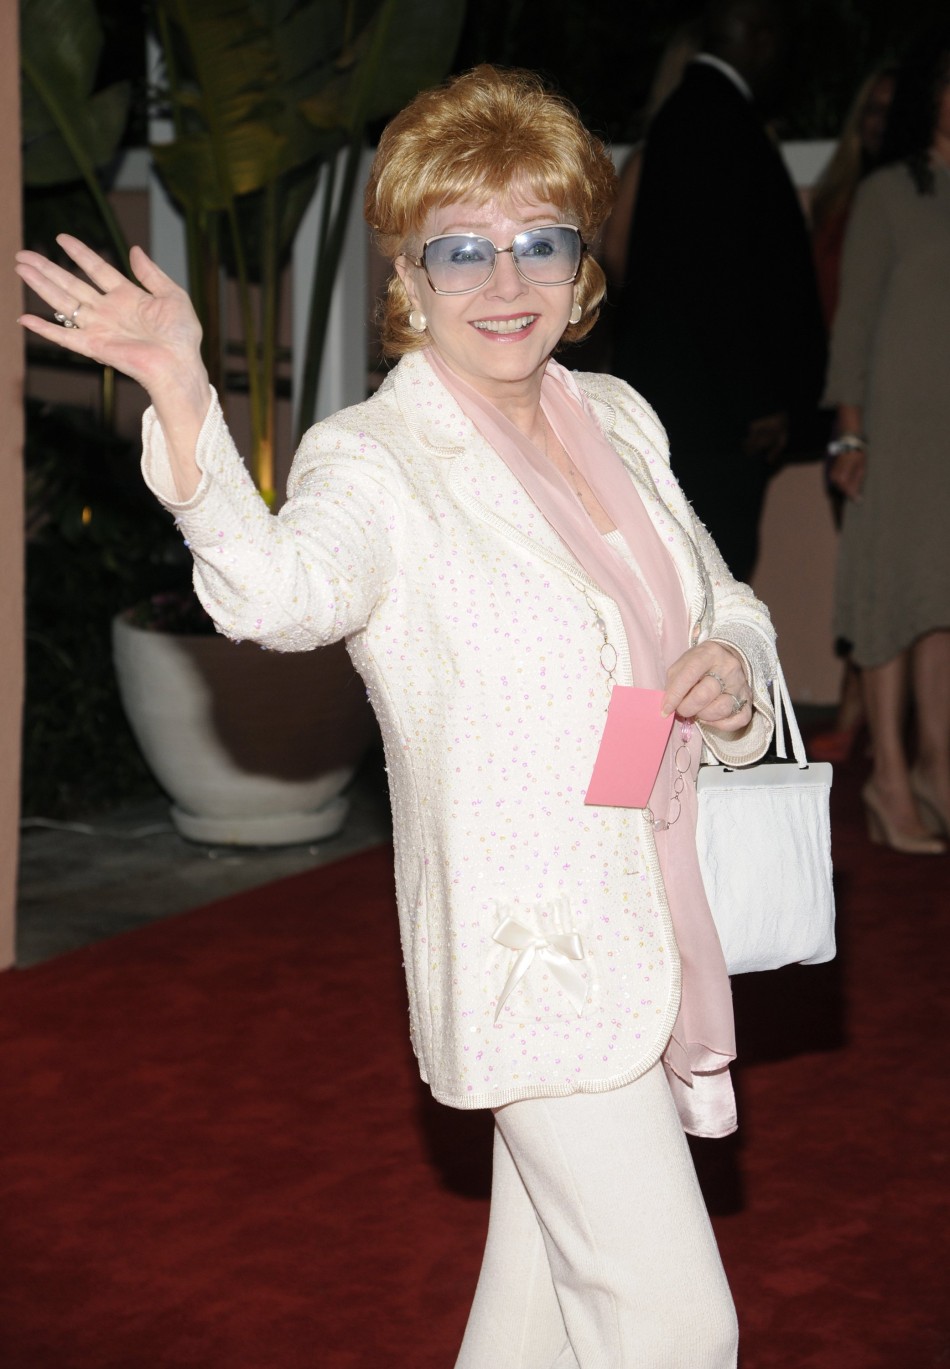 Debbie Reynolds attends the 100th anniversary of The Beverly Hills Hotel in Beverly Hills